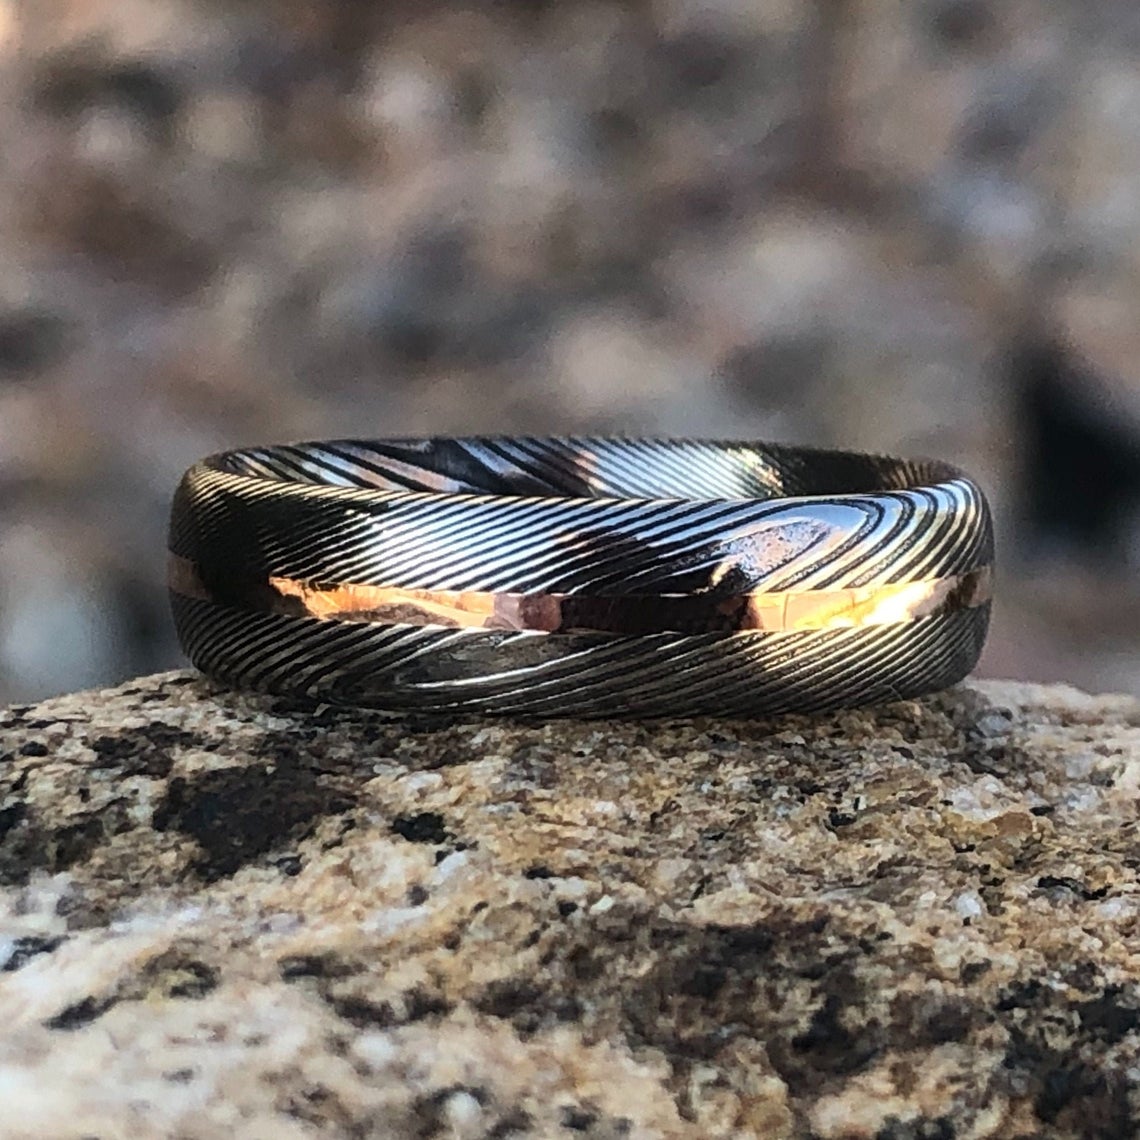 6mm wide Damascus steel ring with a centered rose gold inlay and a rounded profile